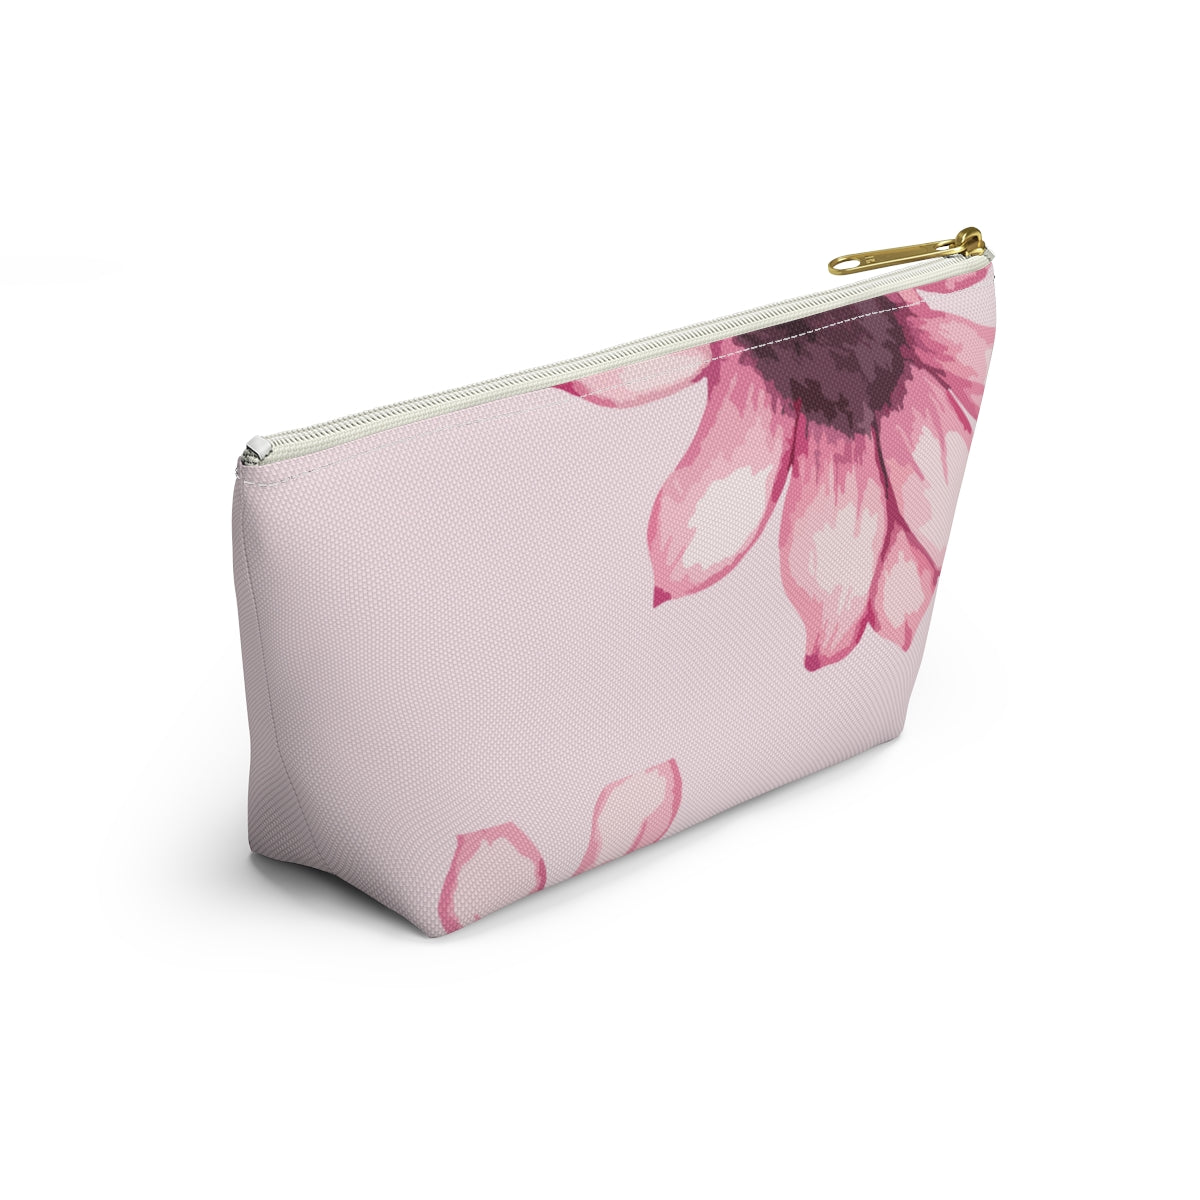 Cosmetic Bag Accessory Pouch Travel Toiletry Bag Designer Pink Floral Makeup Bag for Women and Girls